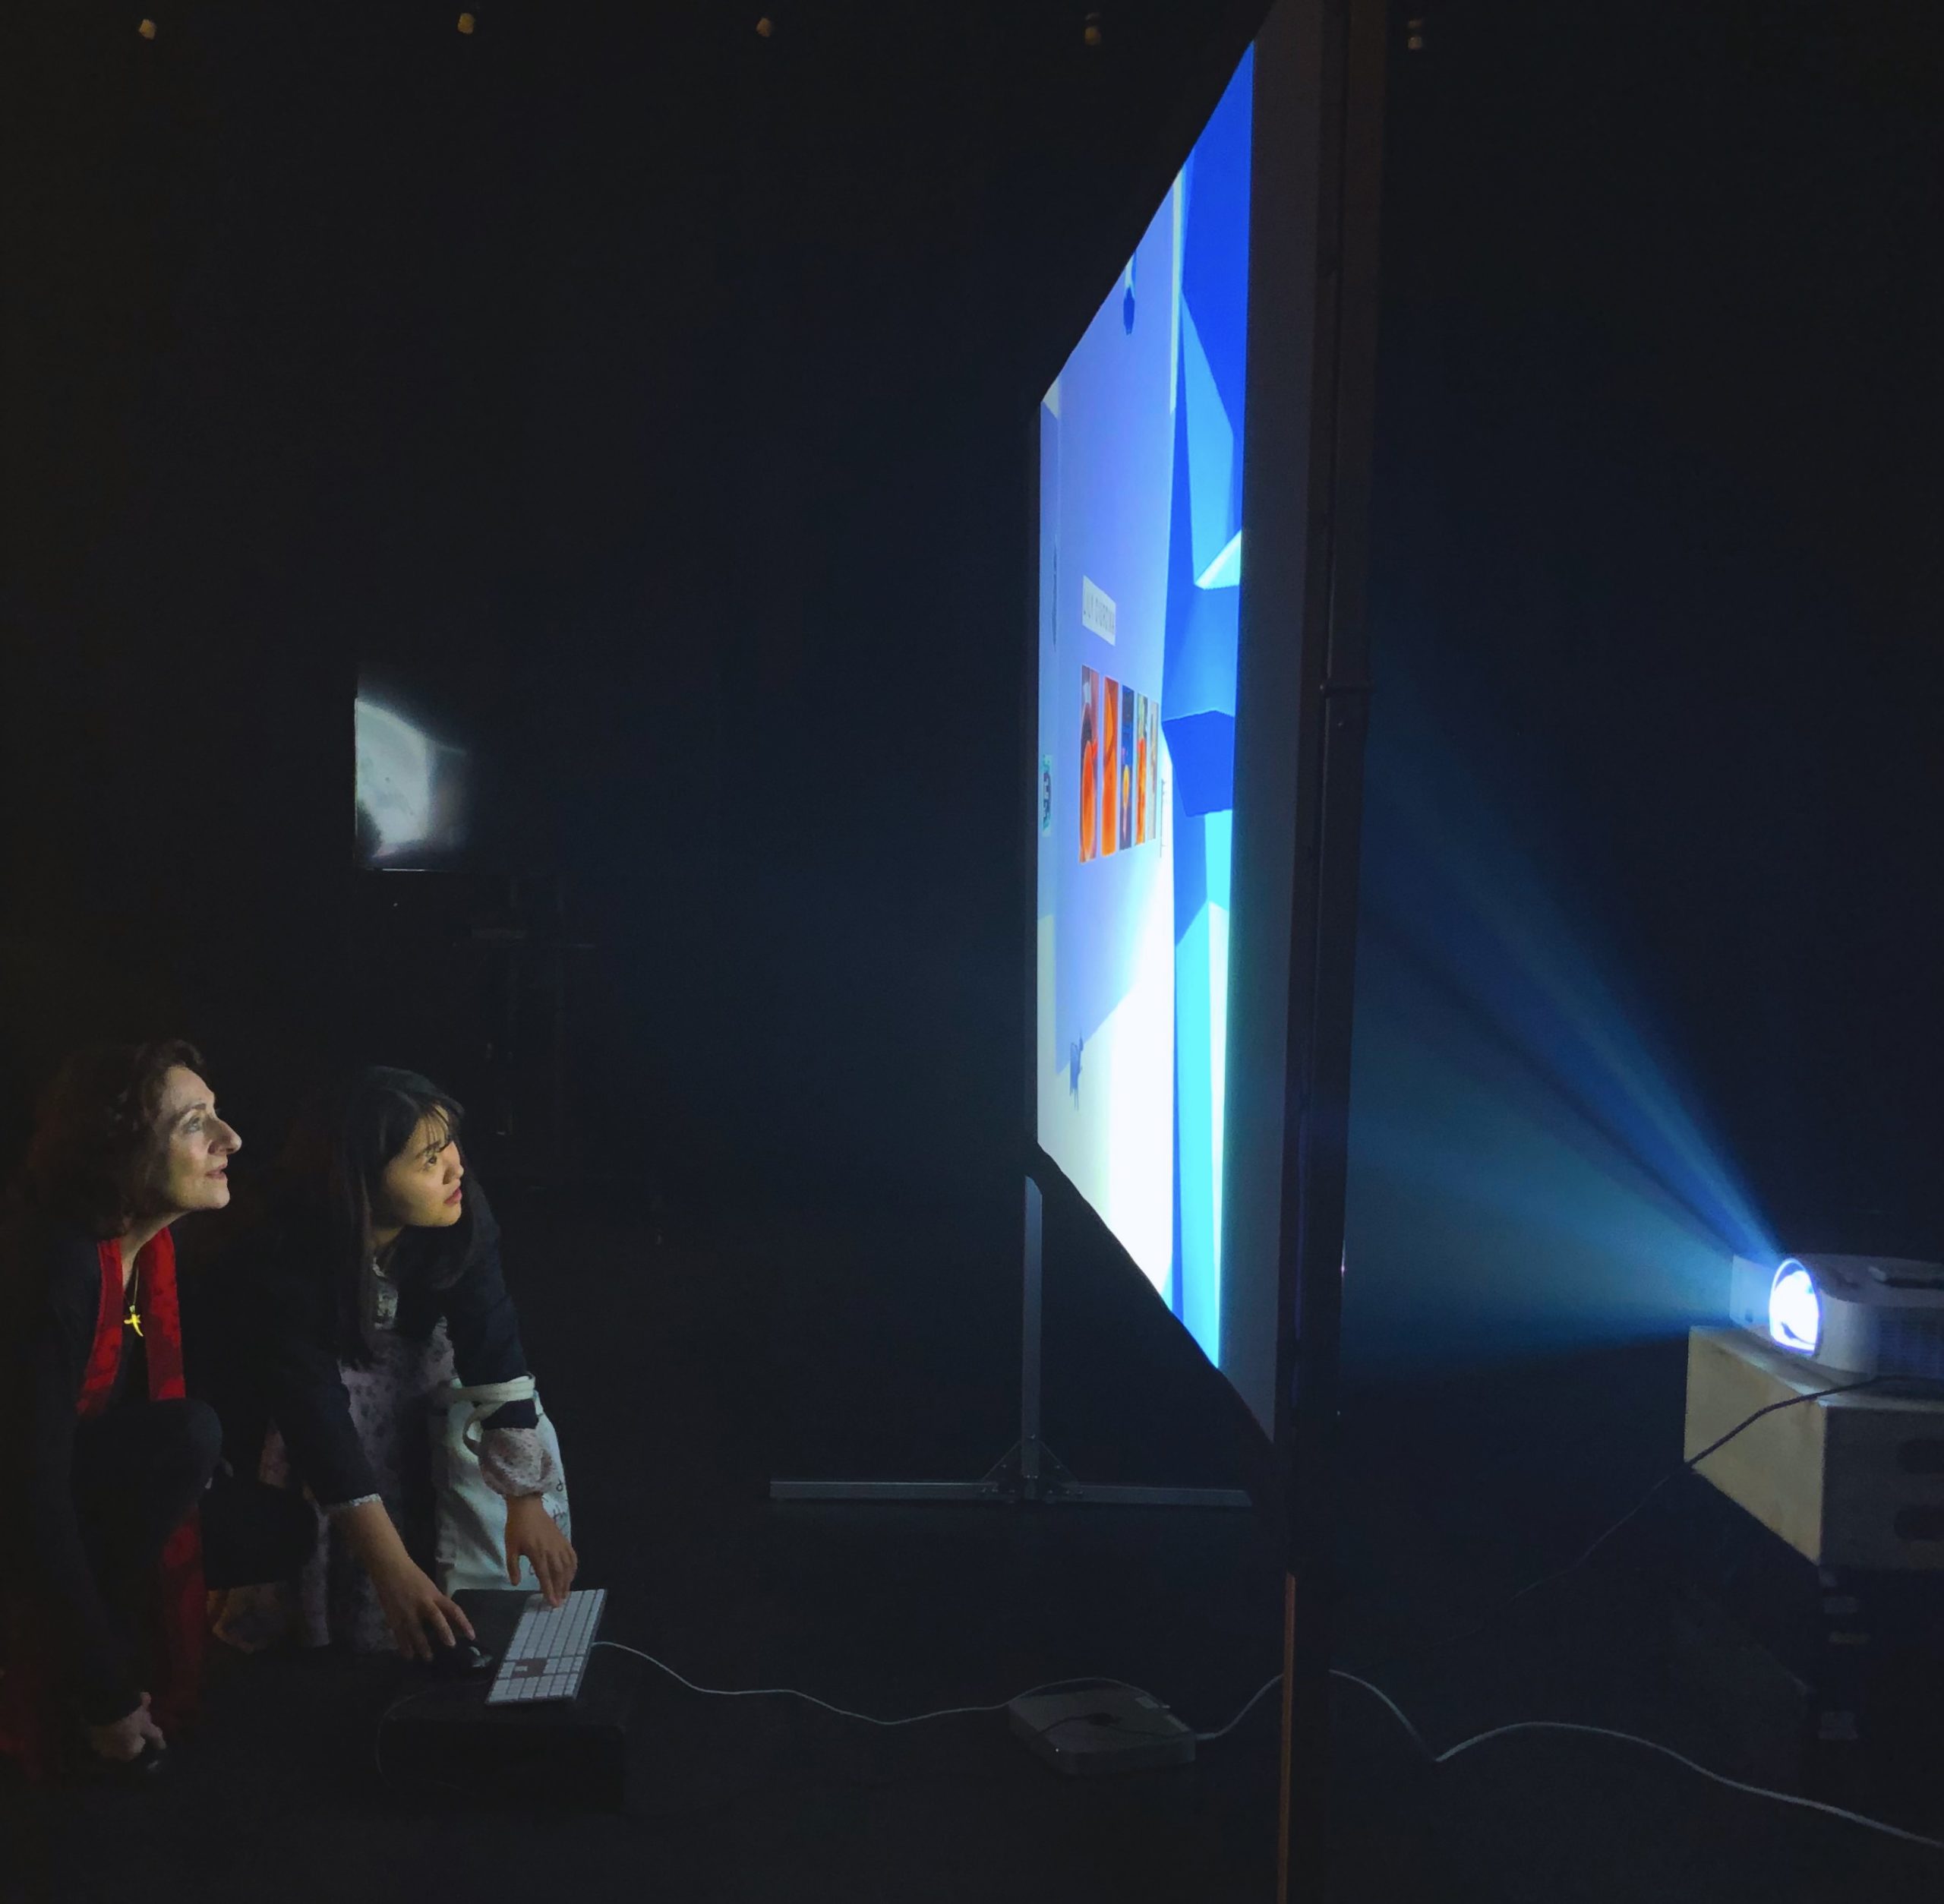 Two women crouch in front of a projected movie screen in a dark room.